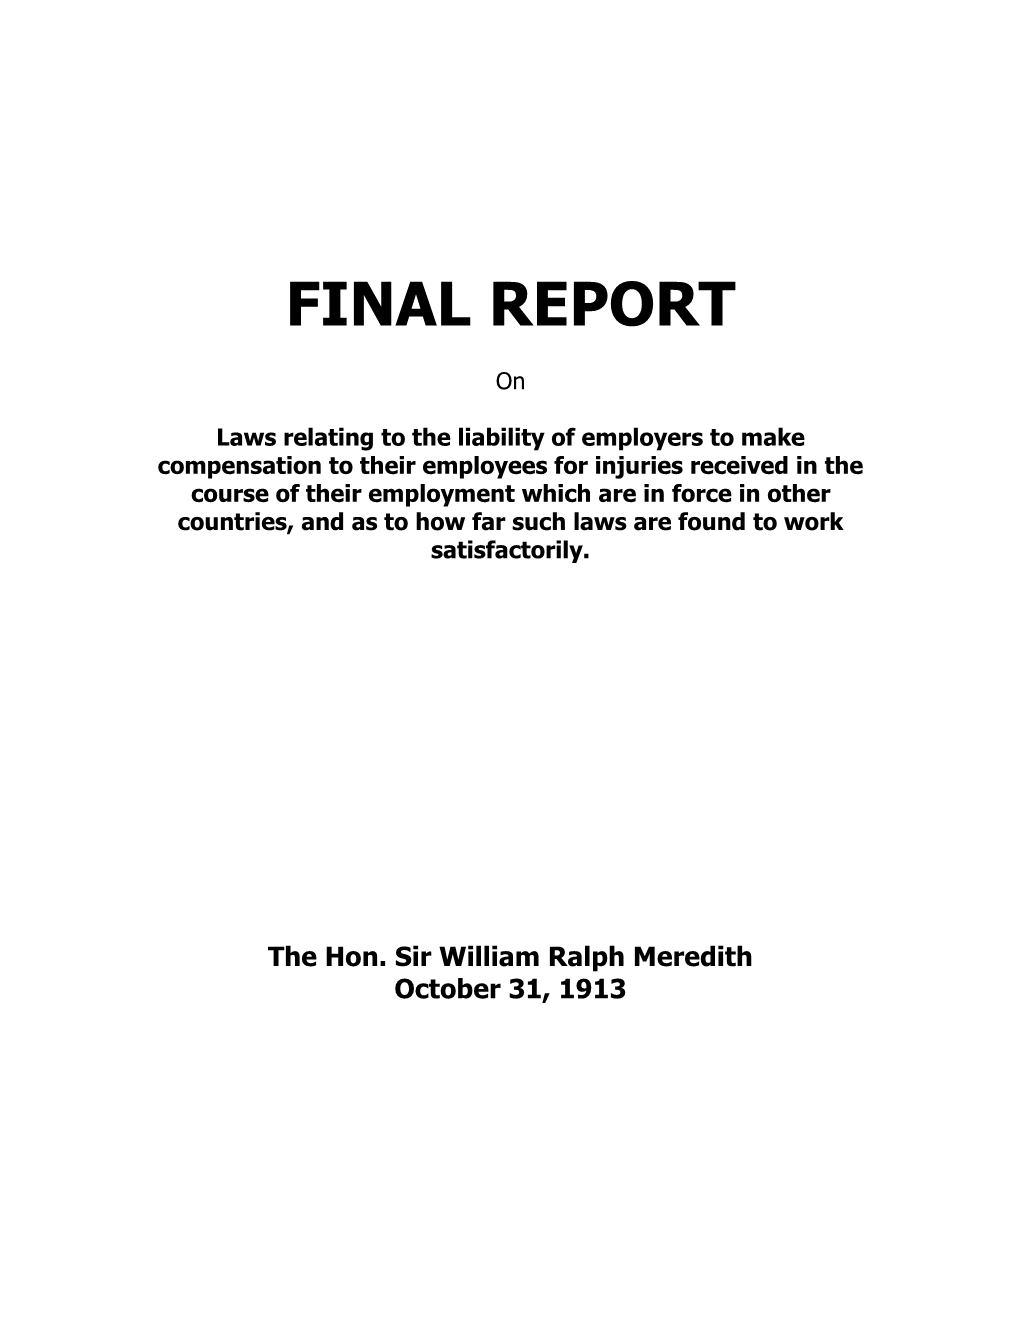 Final Report by the Hon. Sir William Ralph